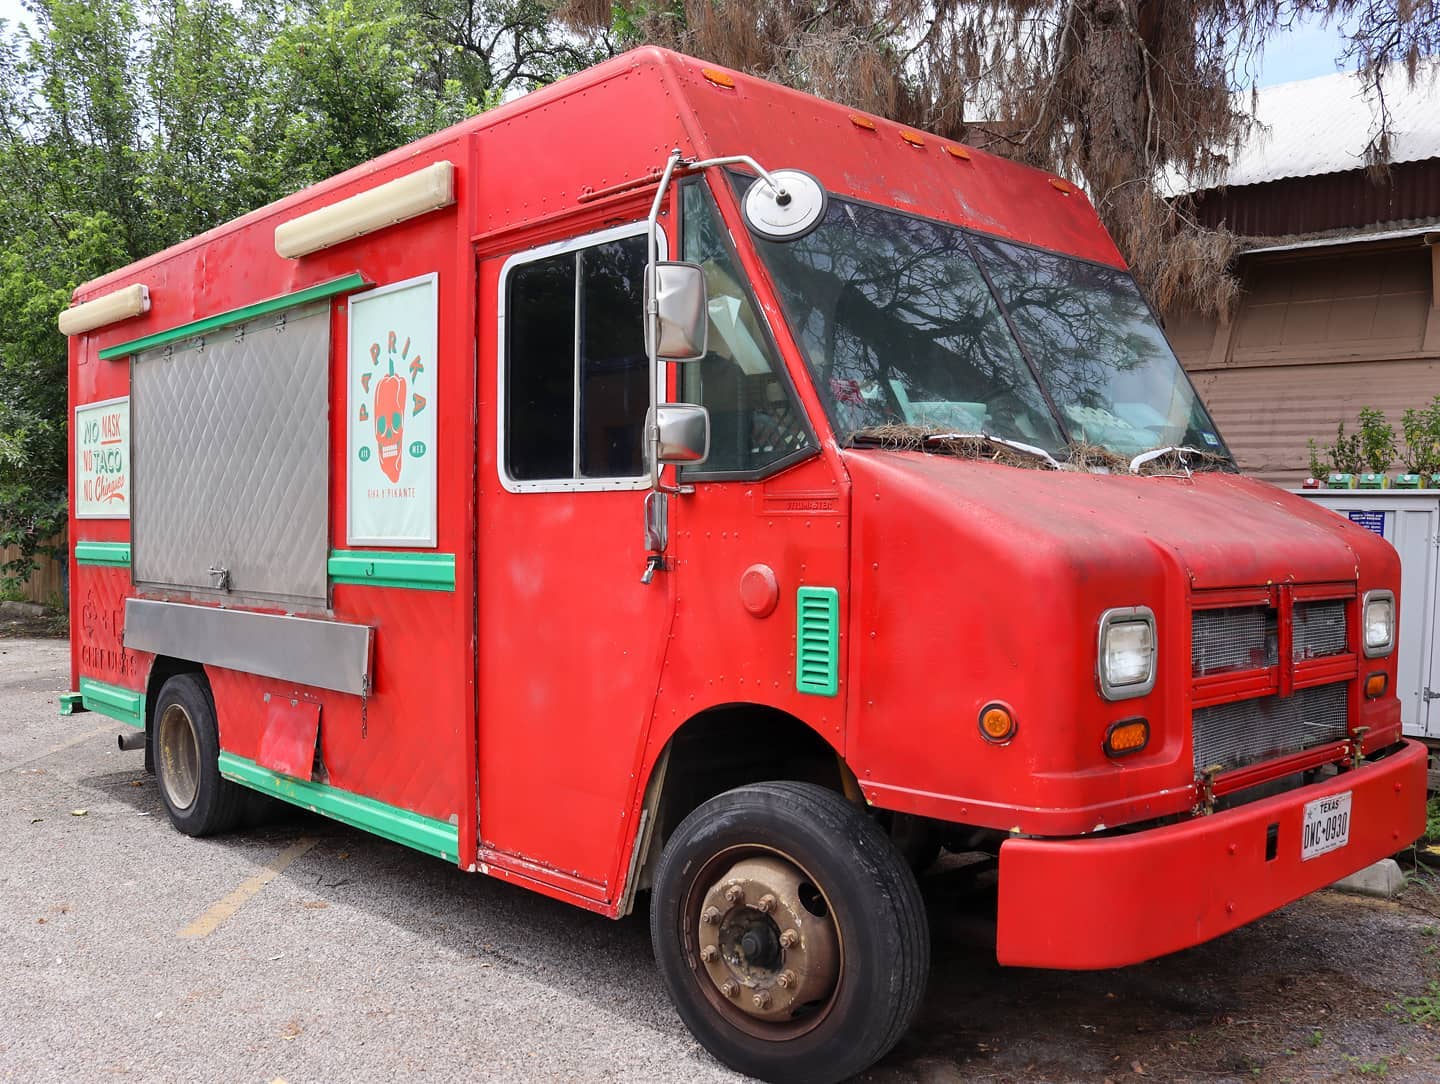 A red food truck.